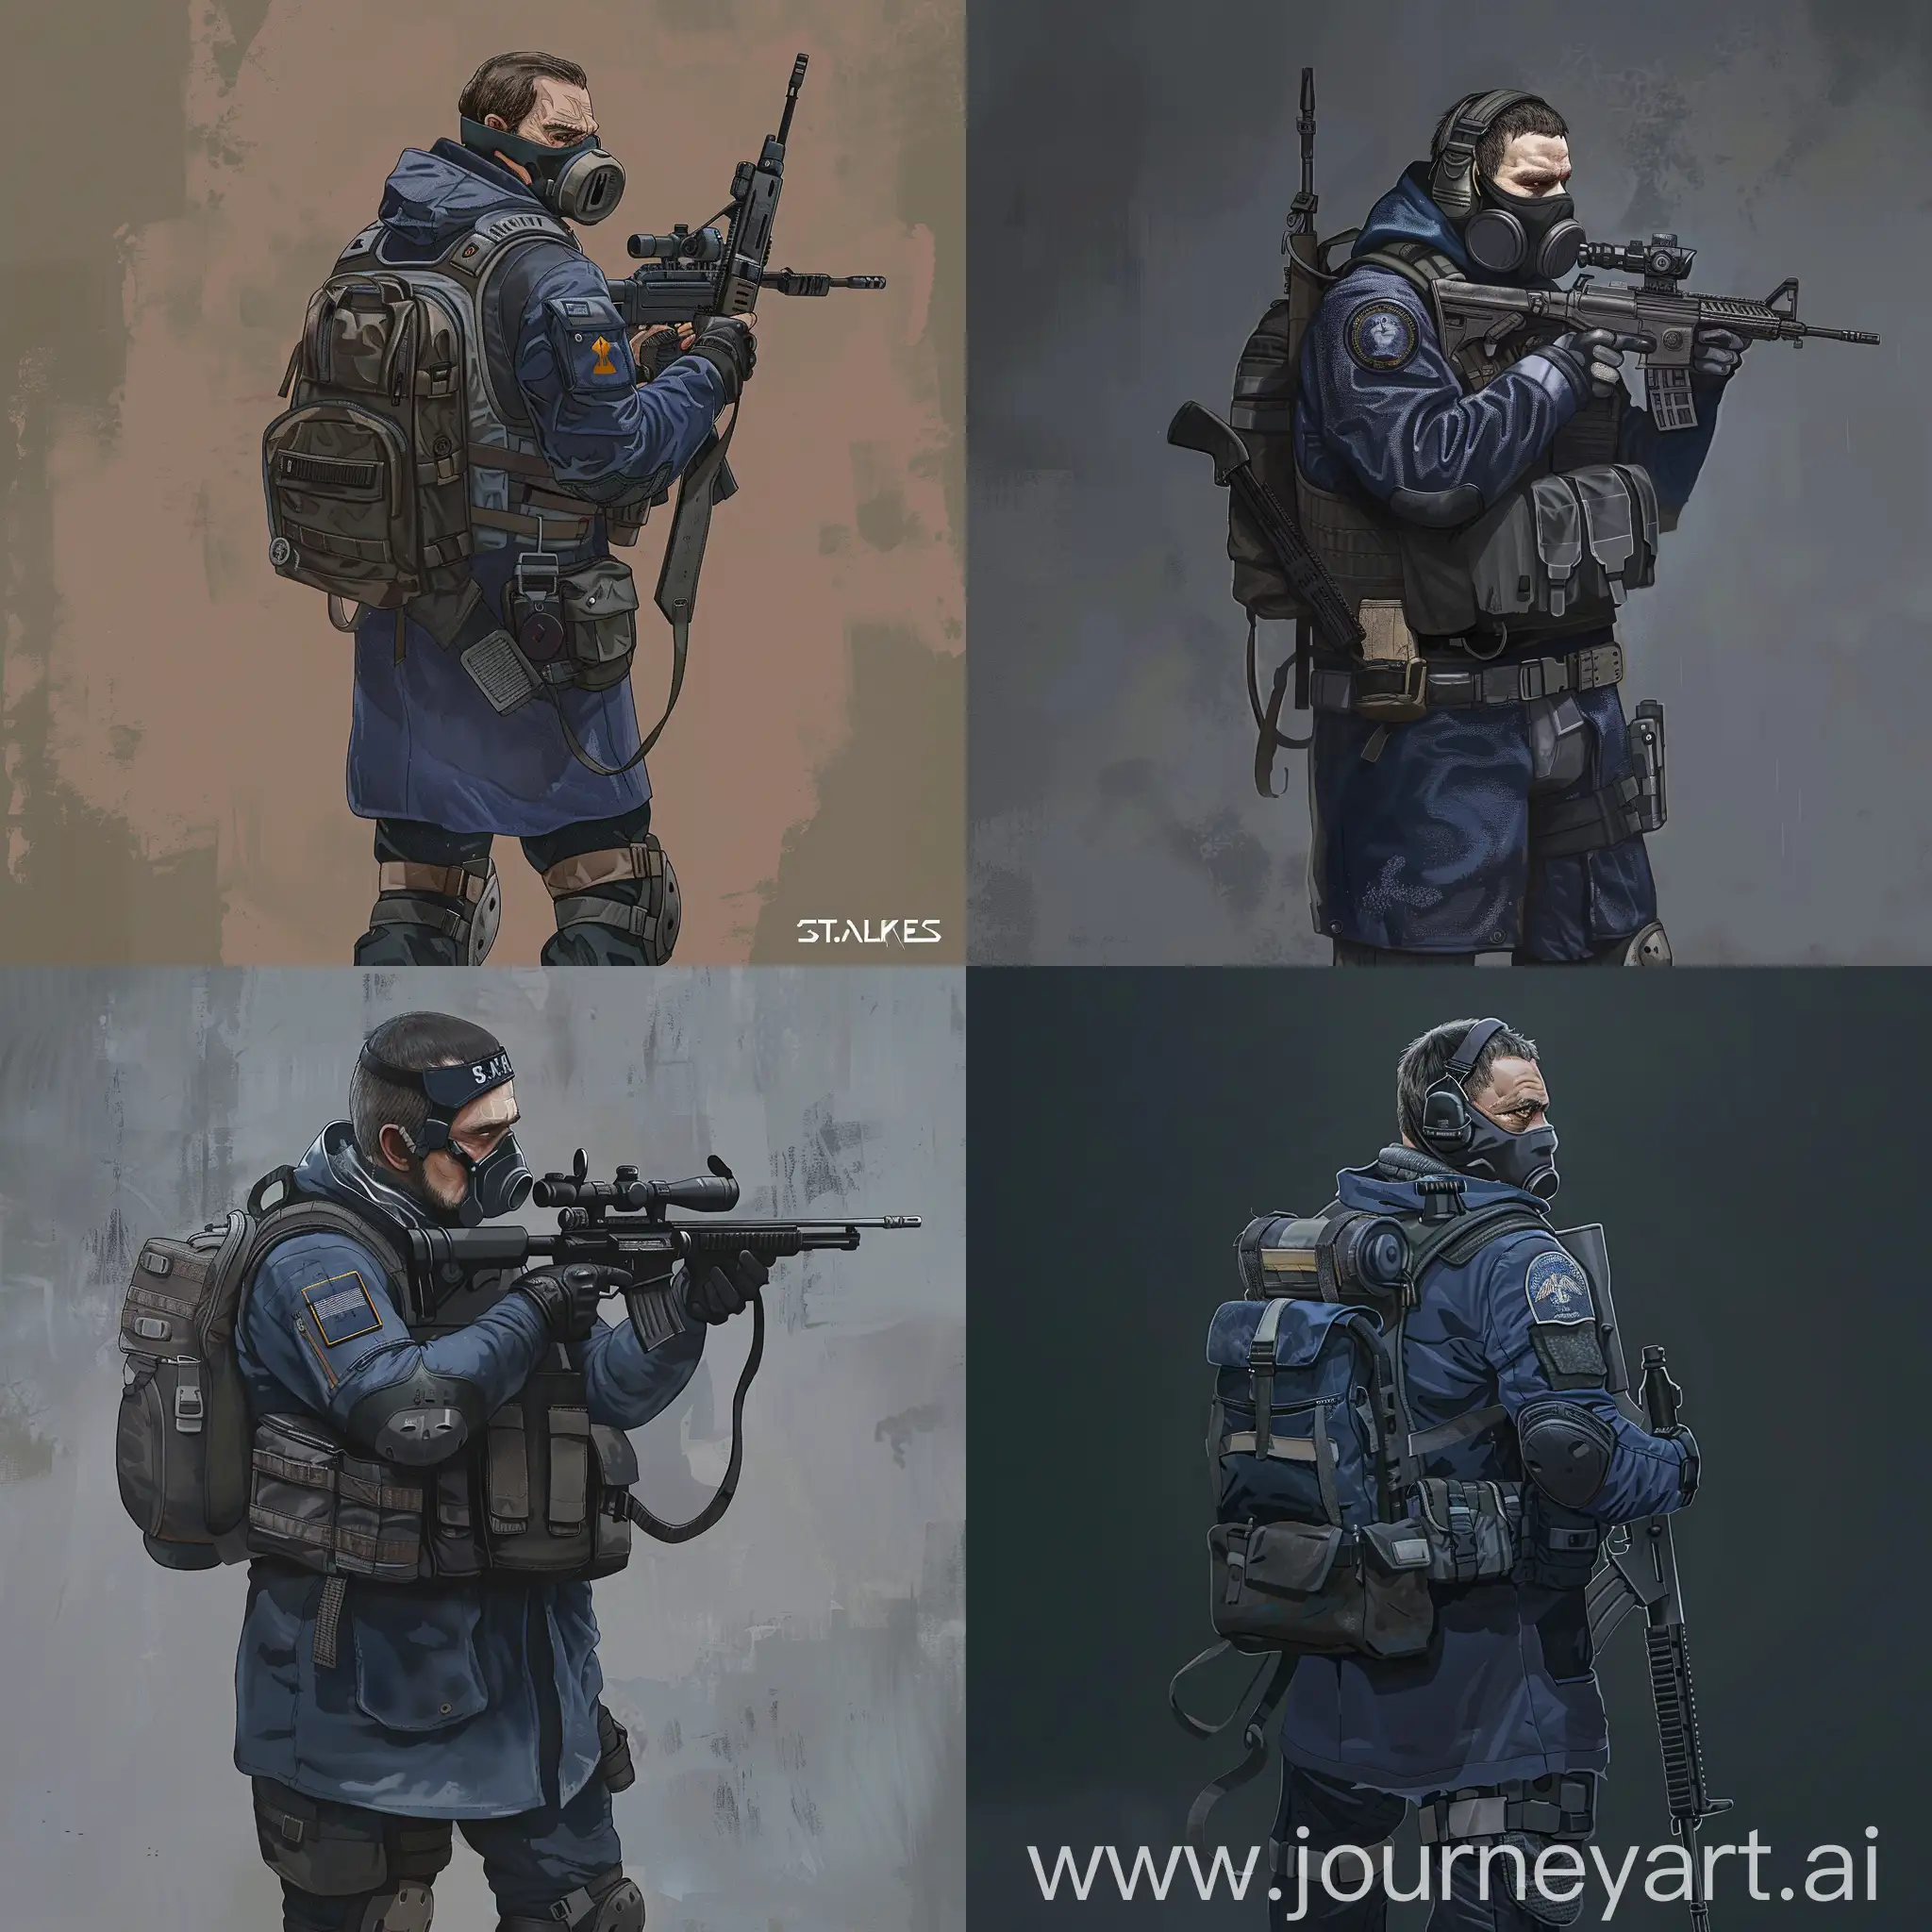 Concept art a mercenary from the universe of S.T.A.L.K.E.R., a mercenary dressed in a dark blue military raincoat, gray military armor on his body, a respirator on his face, a small military backpack on his back, sniper rifle in his hands.